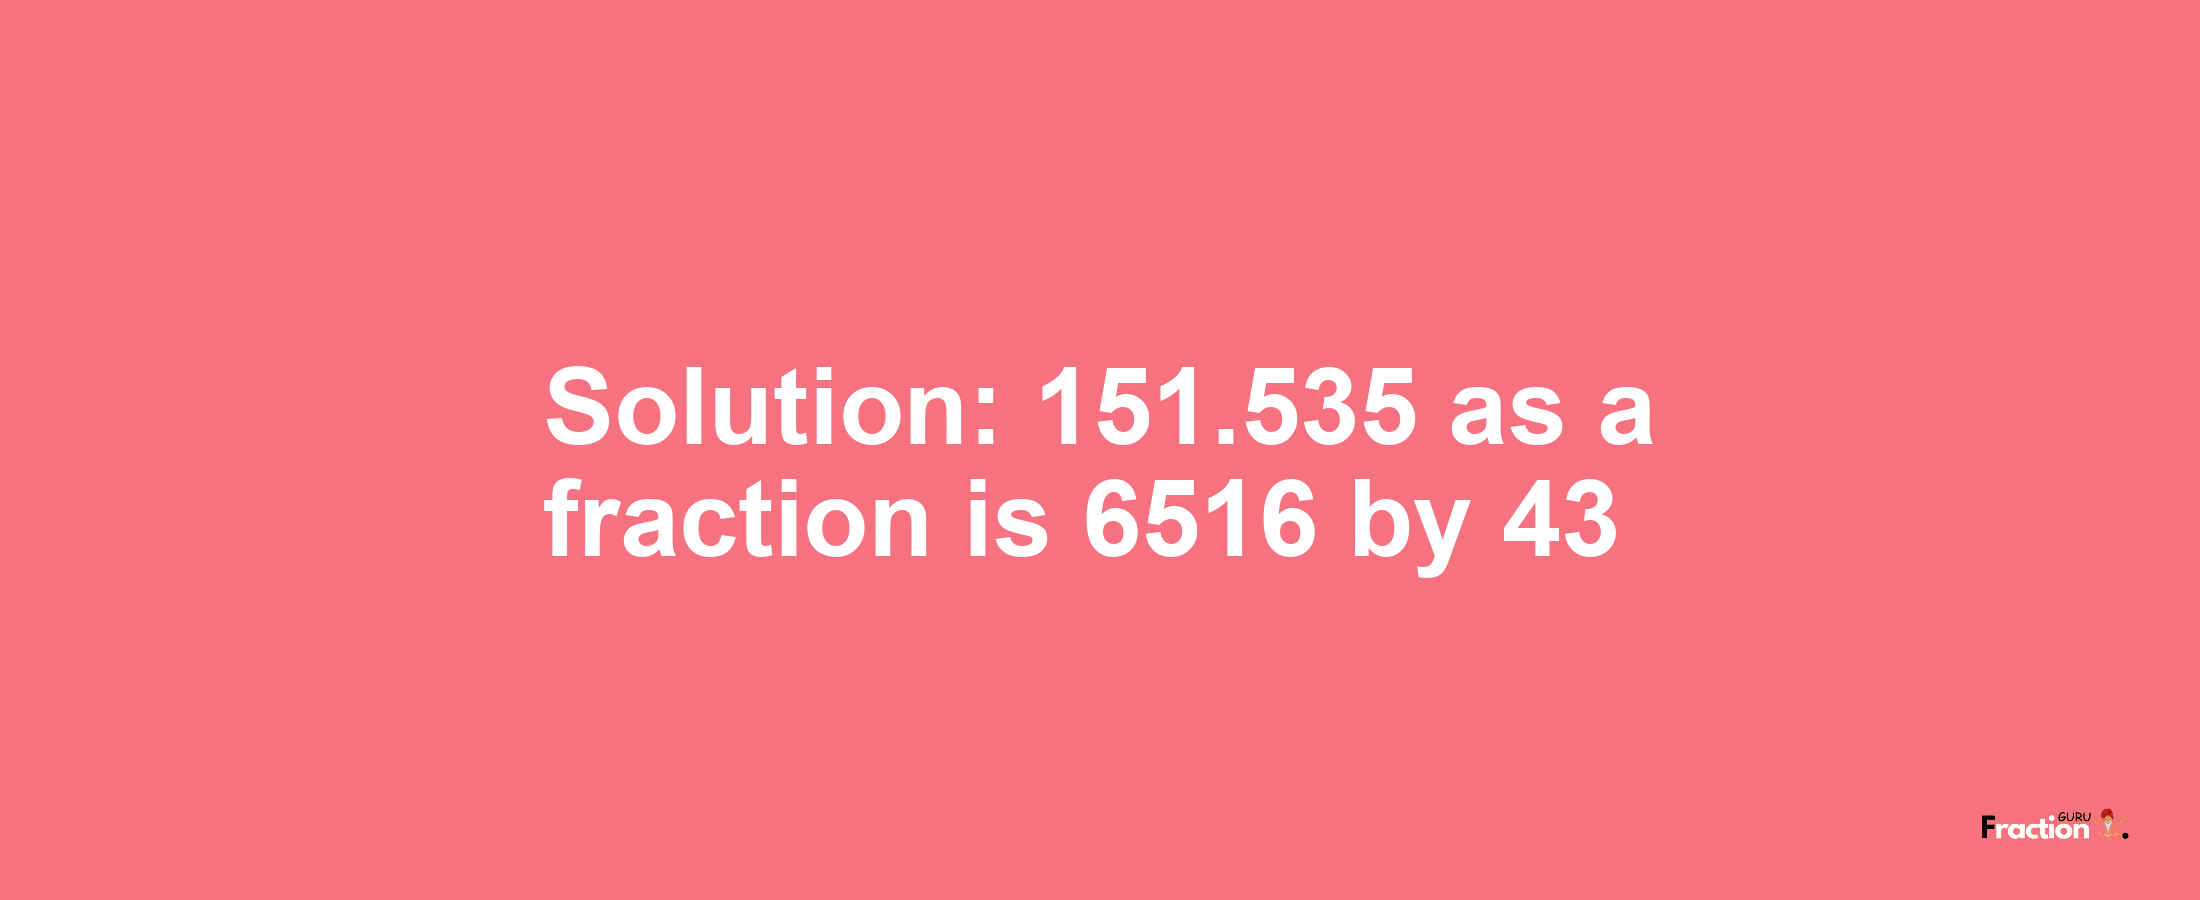 Solution:151.535 as a fraction is 6516/43